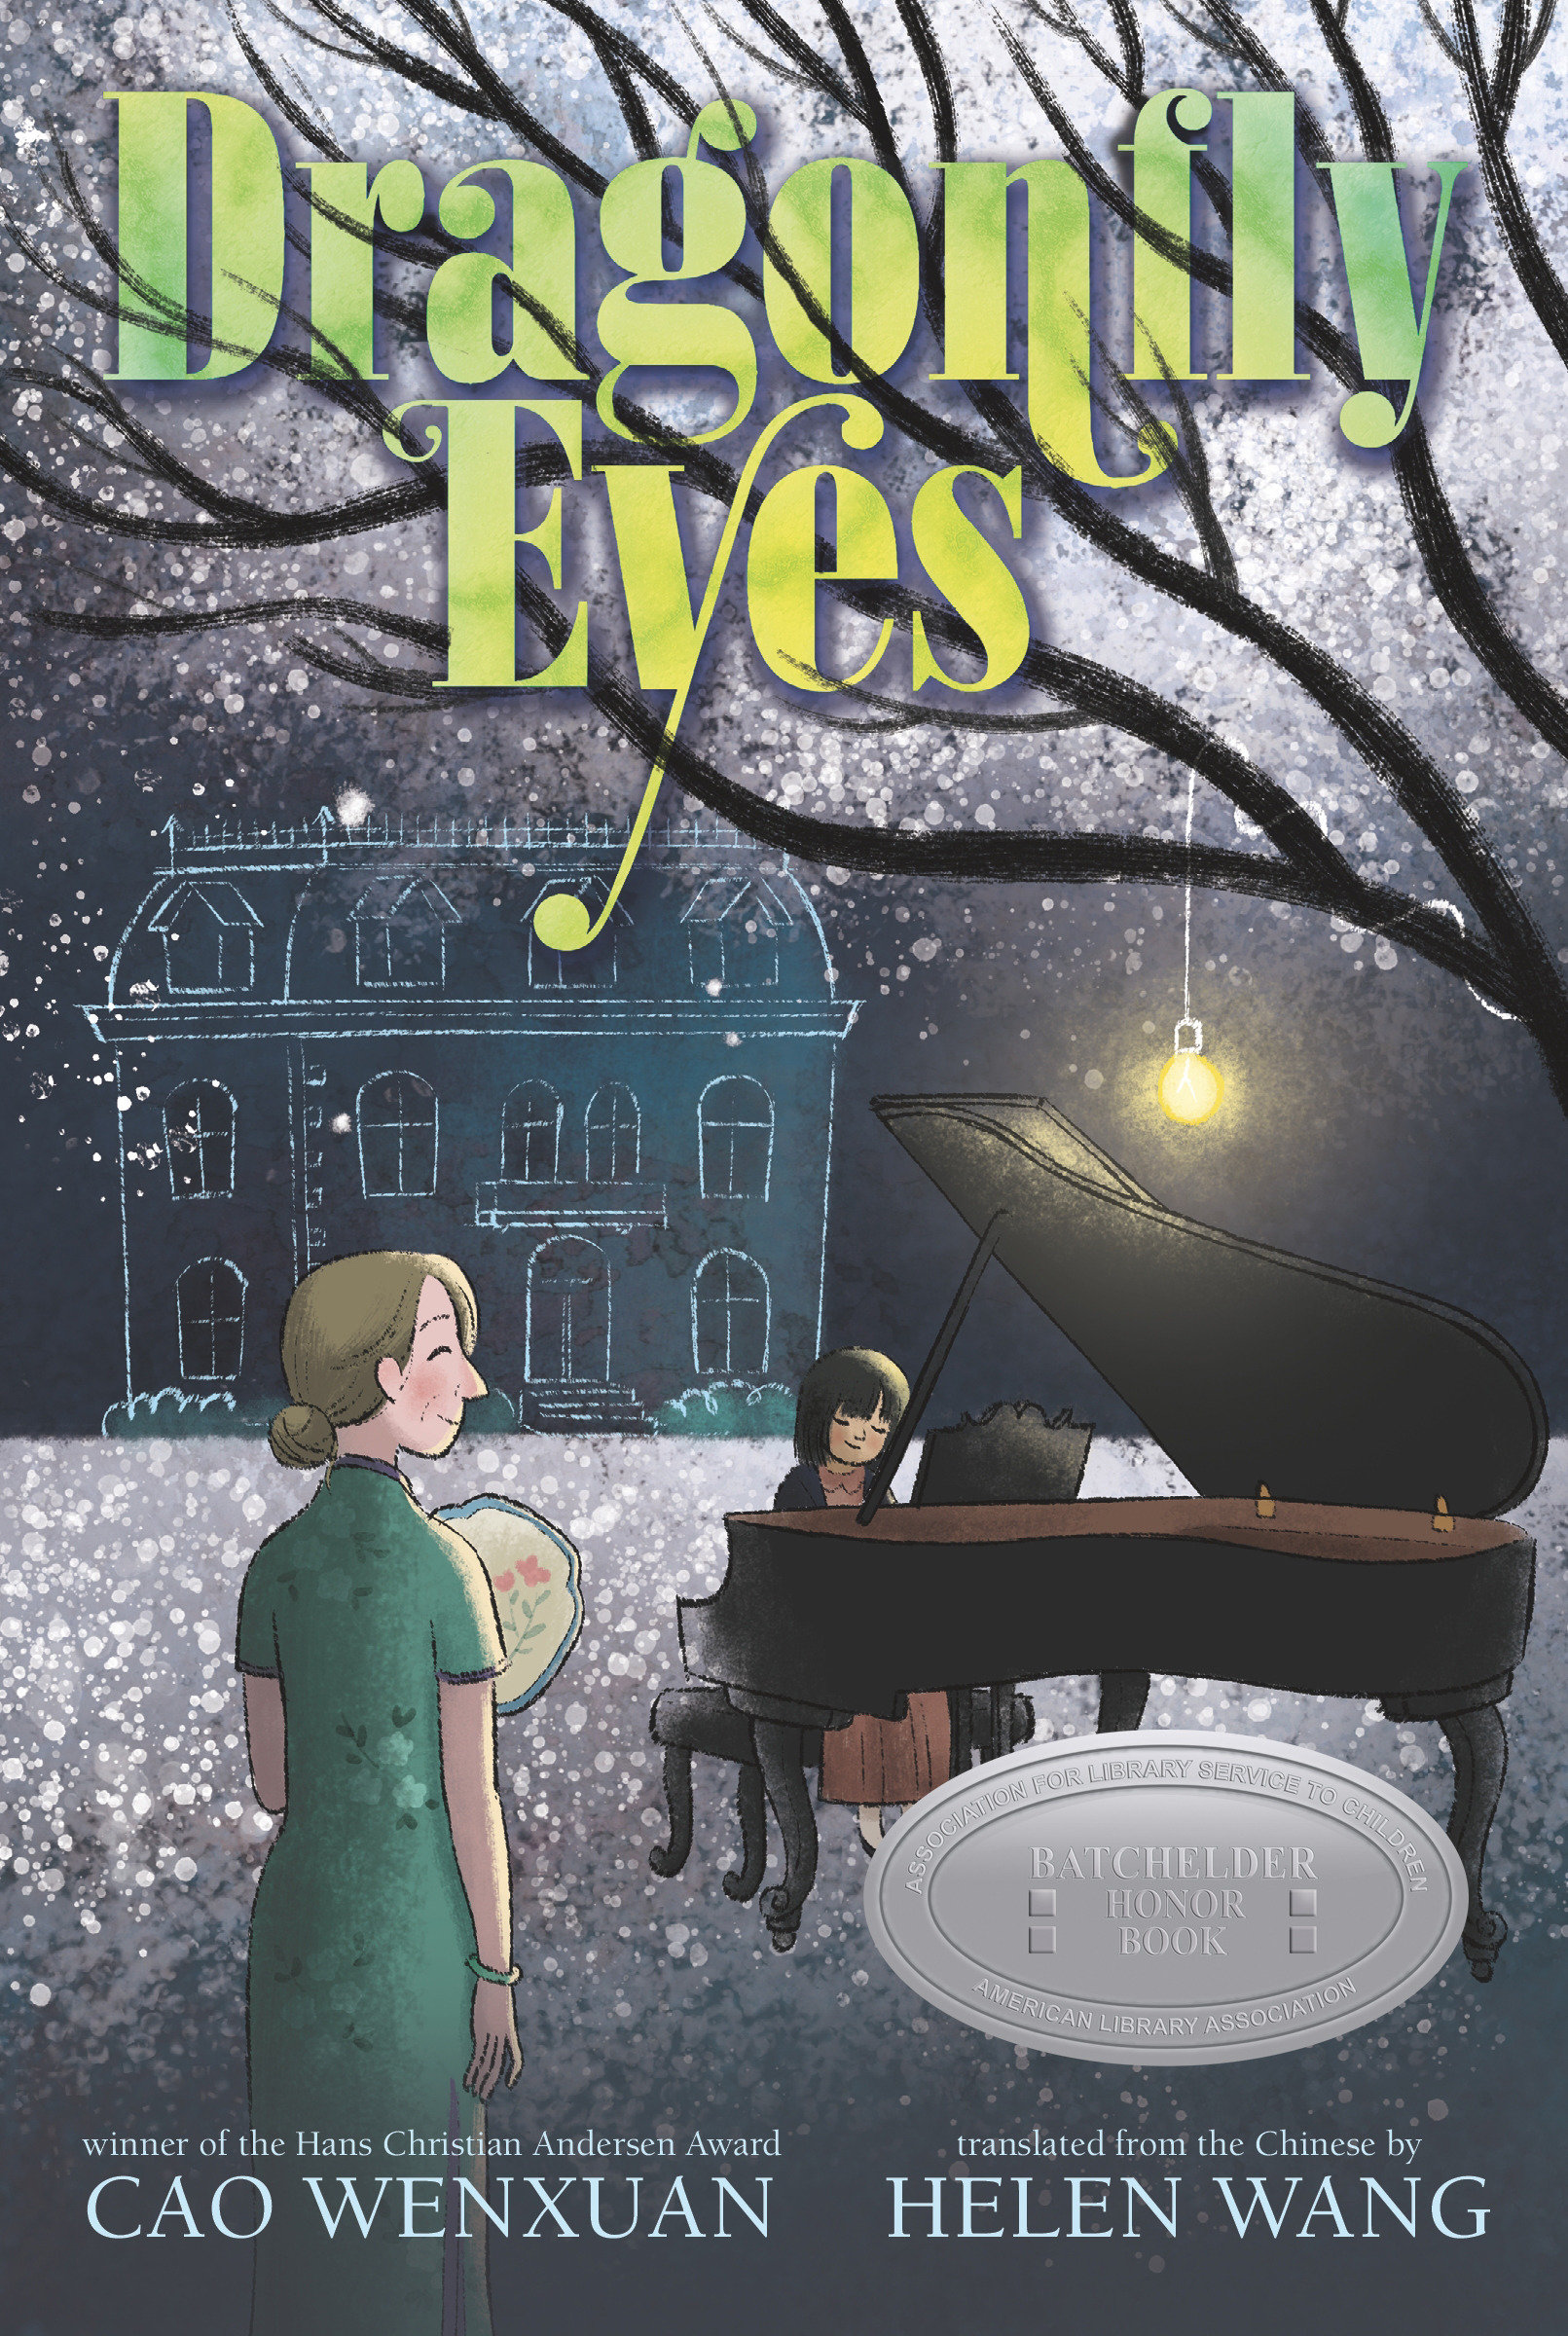 Dragonfly Eyes (Hardcover Book)